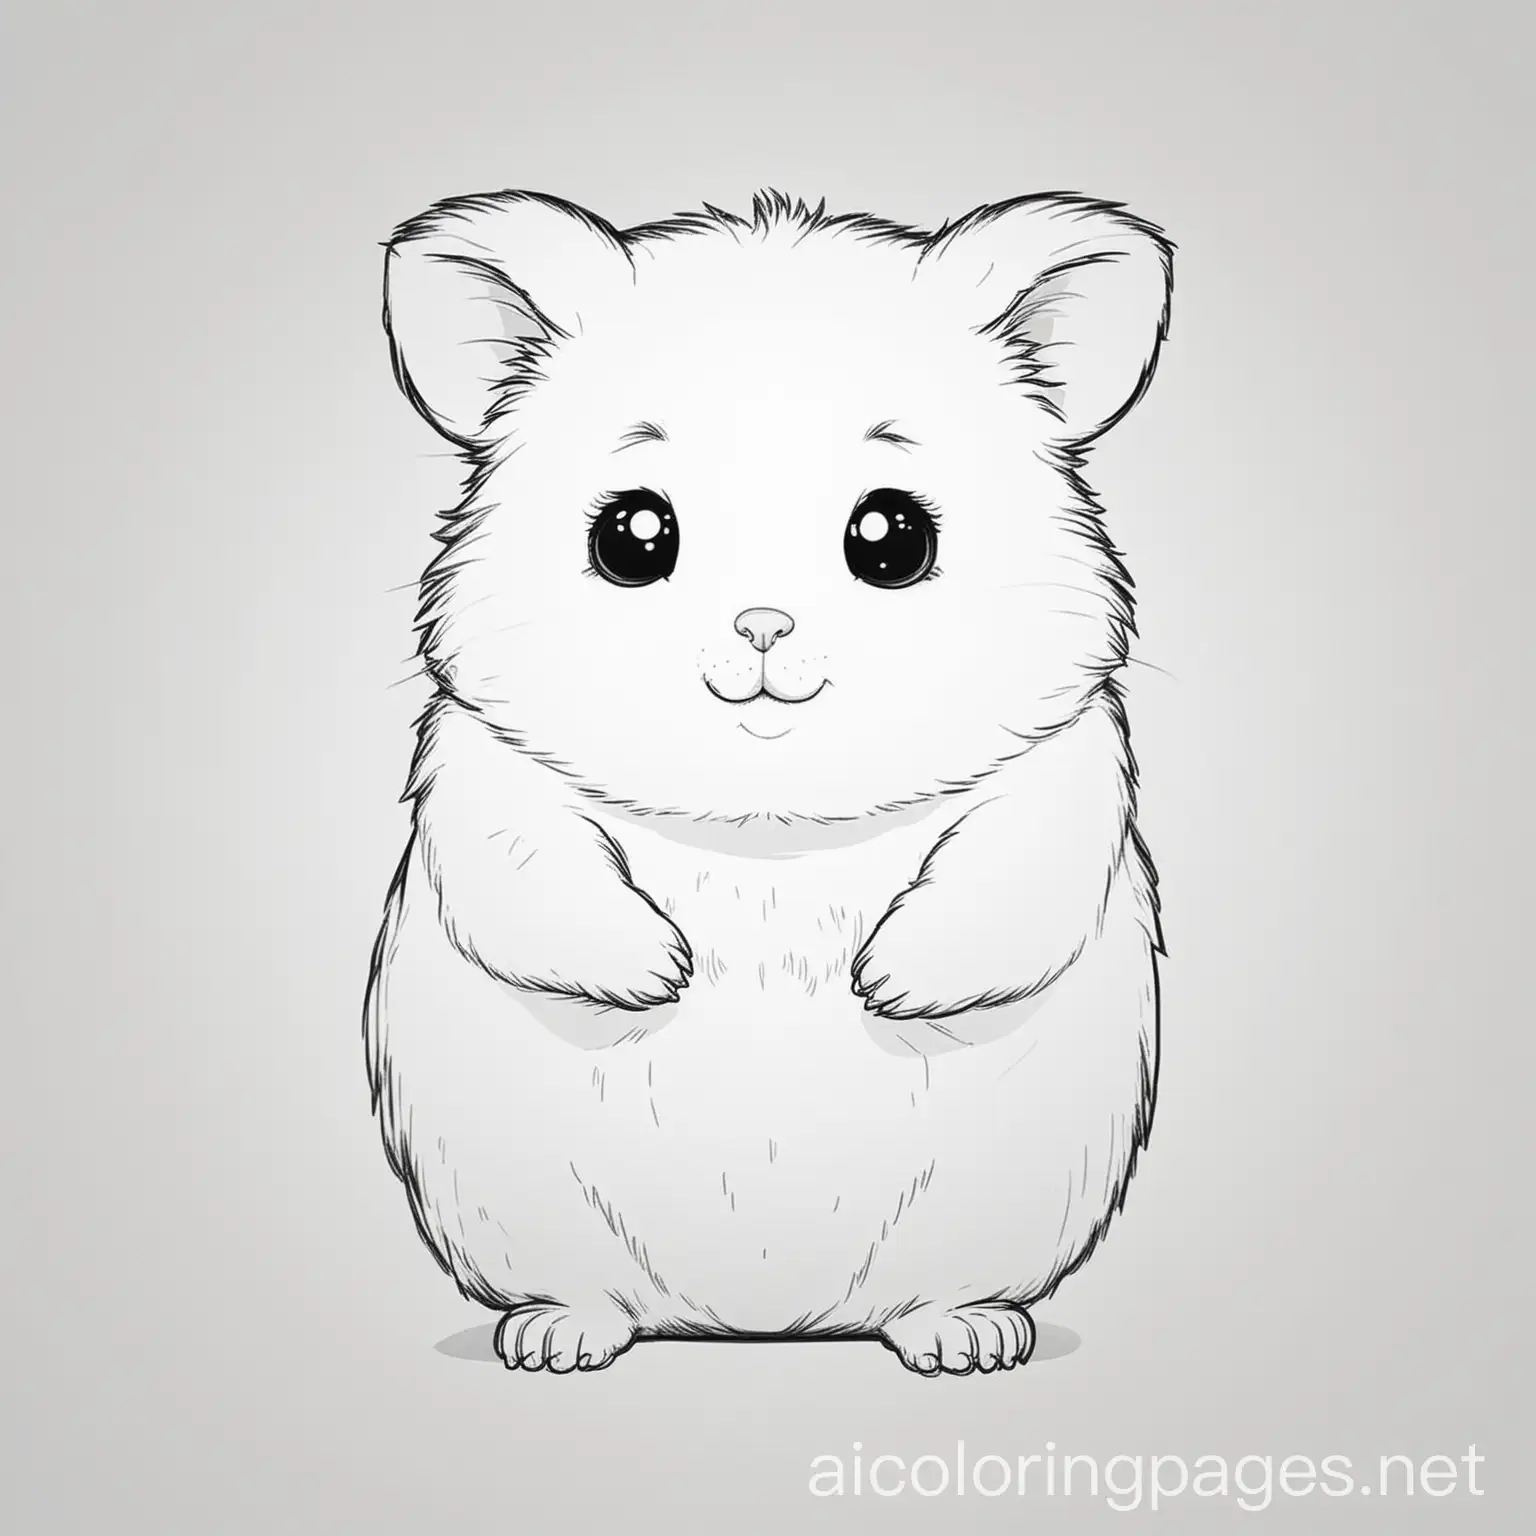 Ein süßen Hamster mit ganzem Körper zum ausmalen, Coloring Page, black and white, line art, white background, Simplicity, Ample White Space. The background of the coloring page is plain white to make it easy for young children to color within the lines. The outlines of all the subjects are easy to distinguish, making it simple for kids to color without too much difficulty